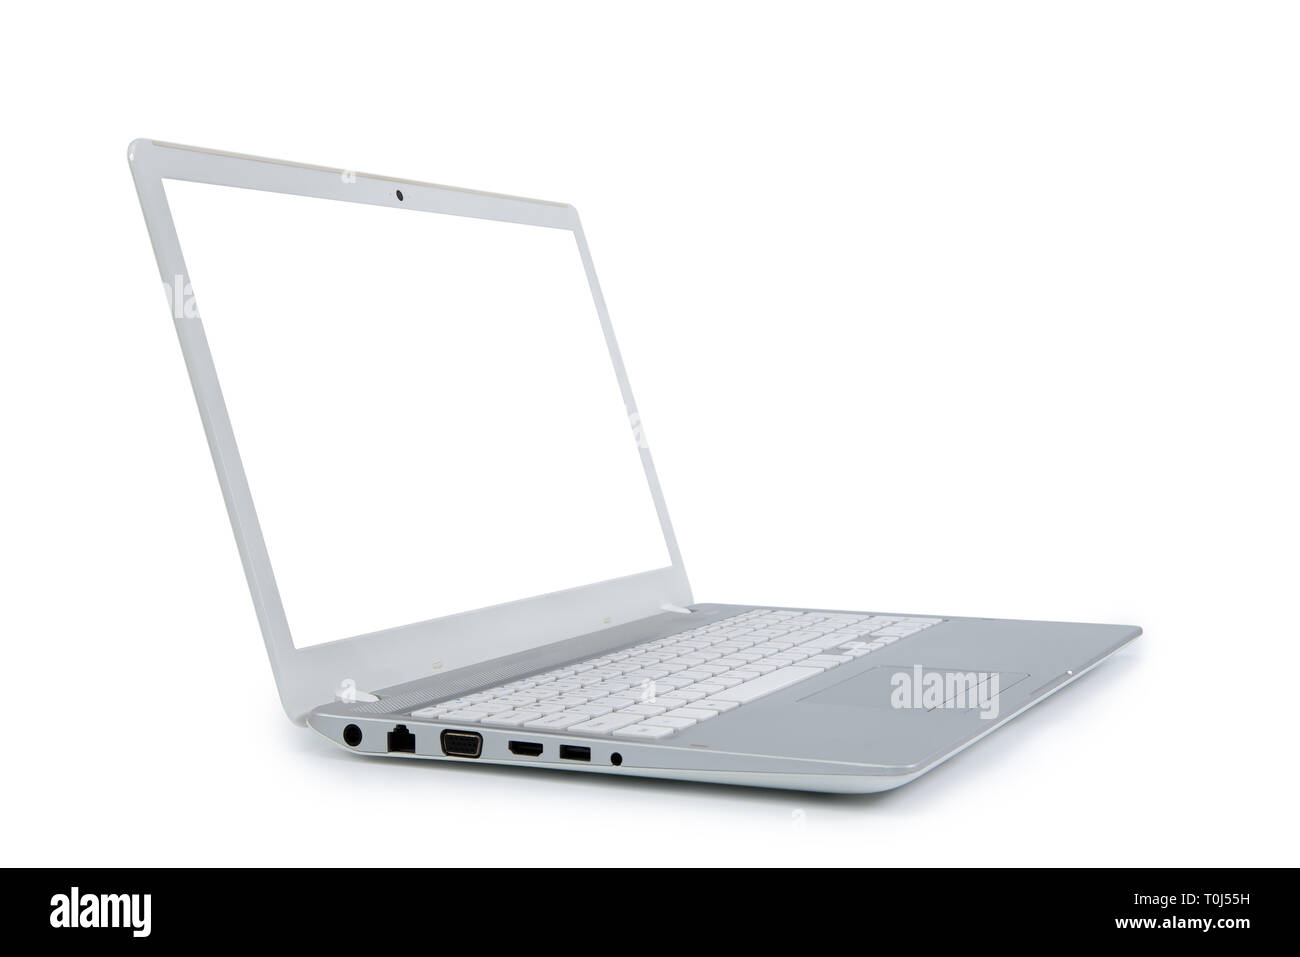 Isolated laptop with empty space on white background. Stock Photo